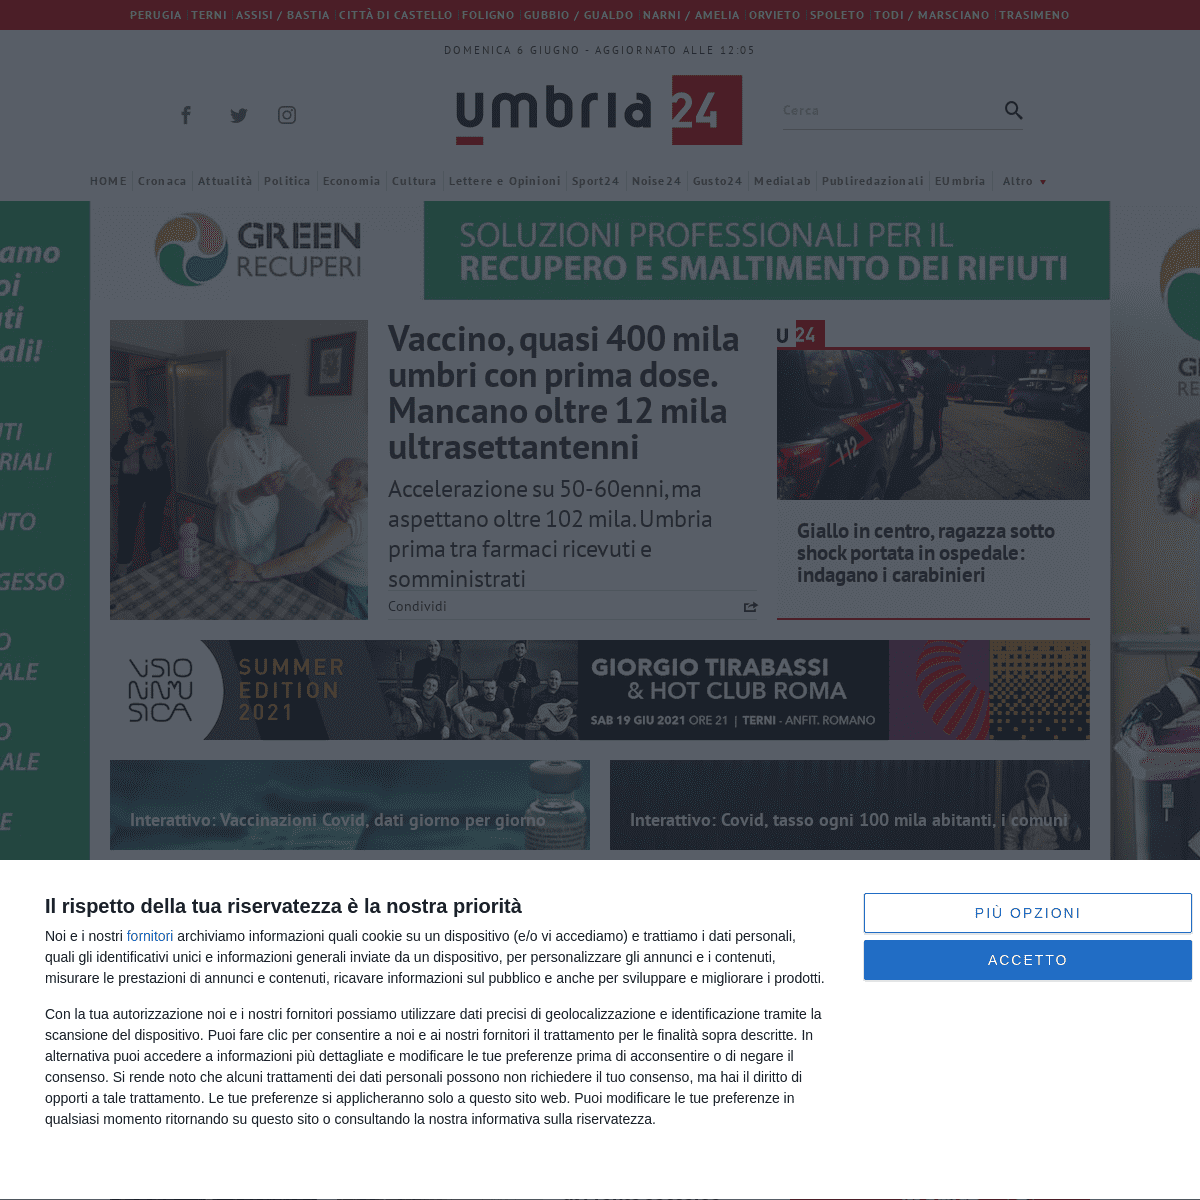 A complete backup of https://umbria24.it